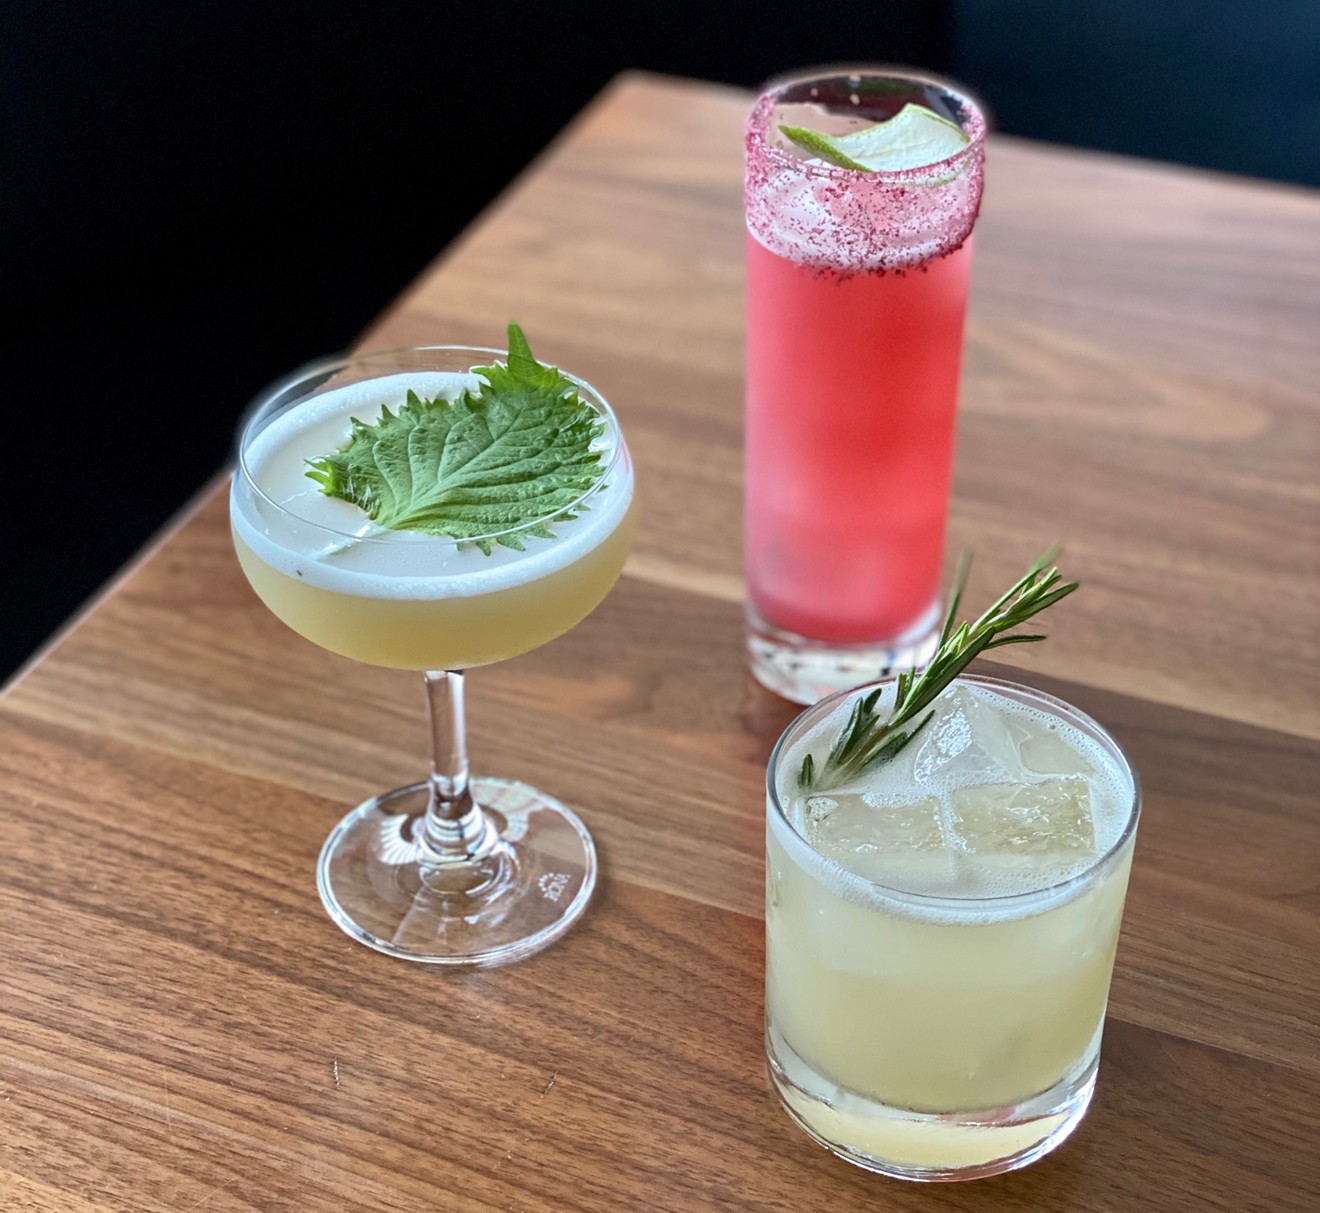 Enjoy these cocktails at home.